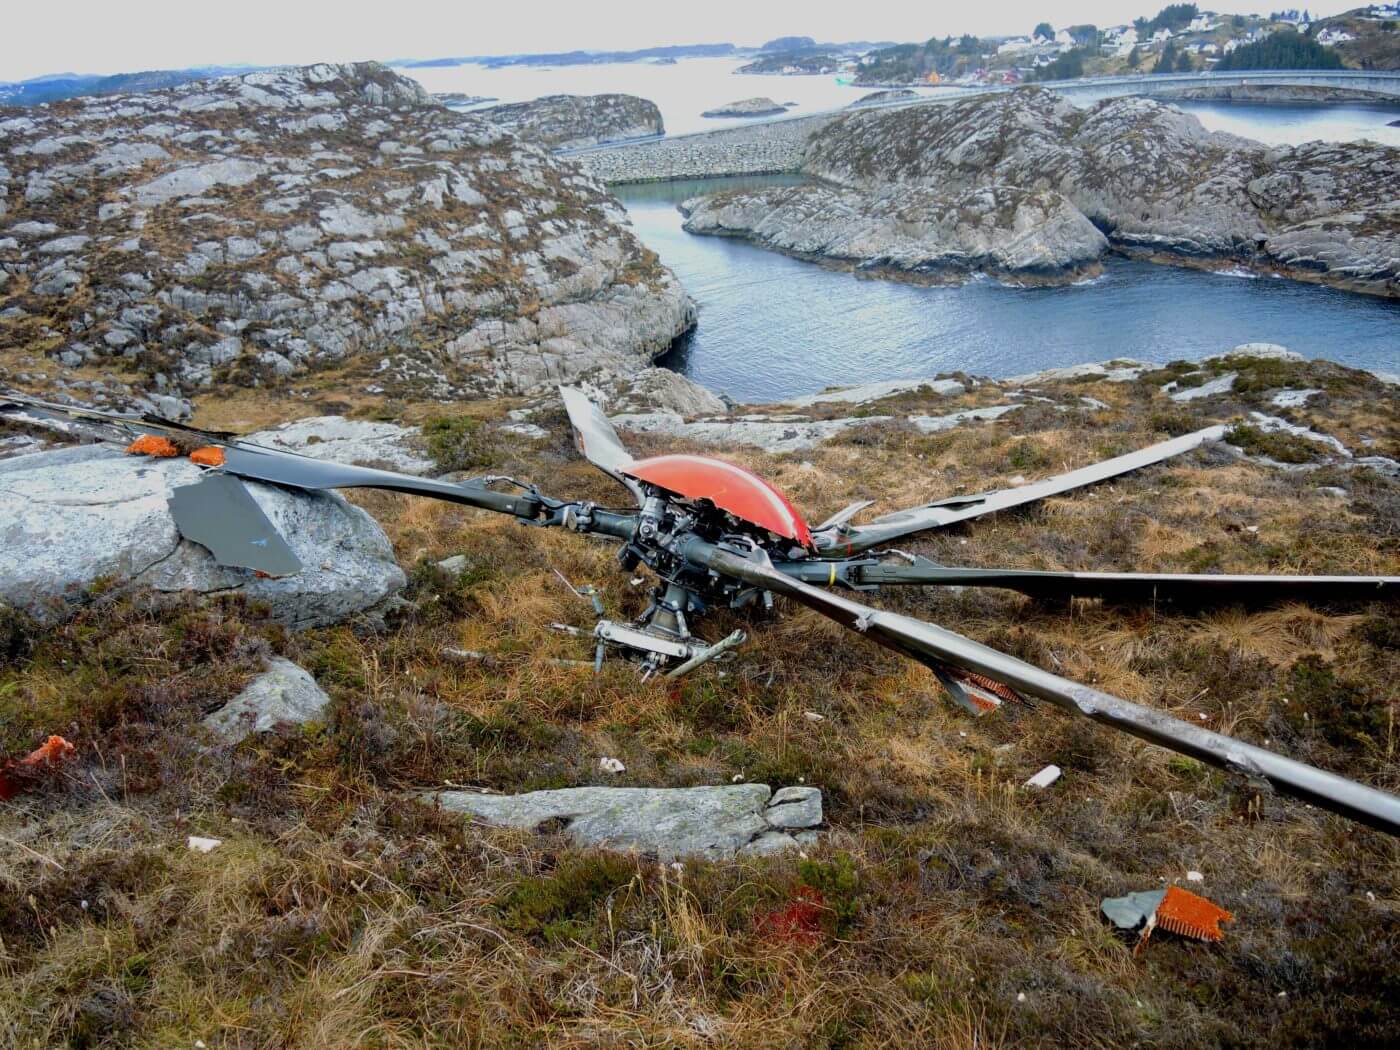 The aircraft's main rotor landed 550 meters away from the main crash site. AIBN Photo